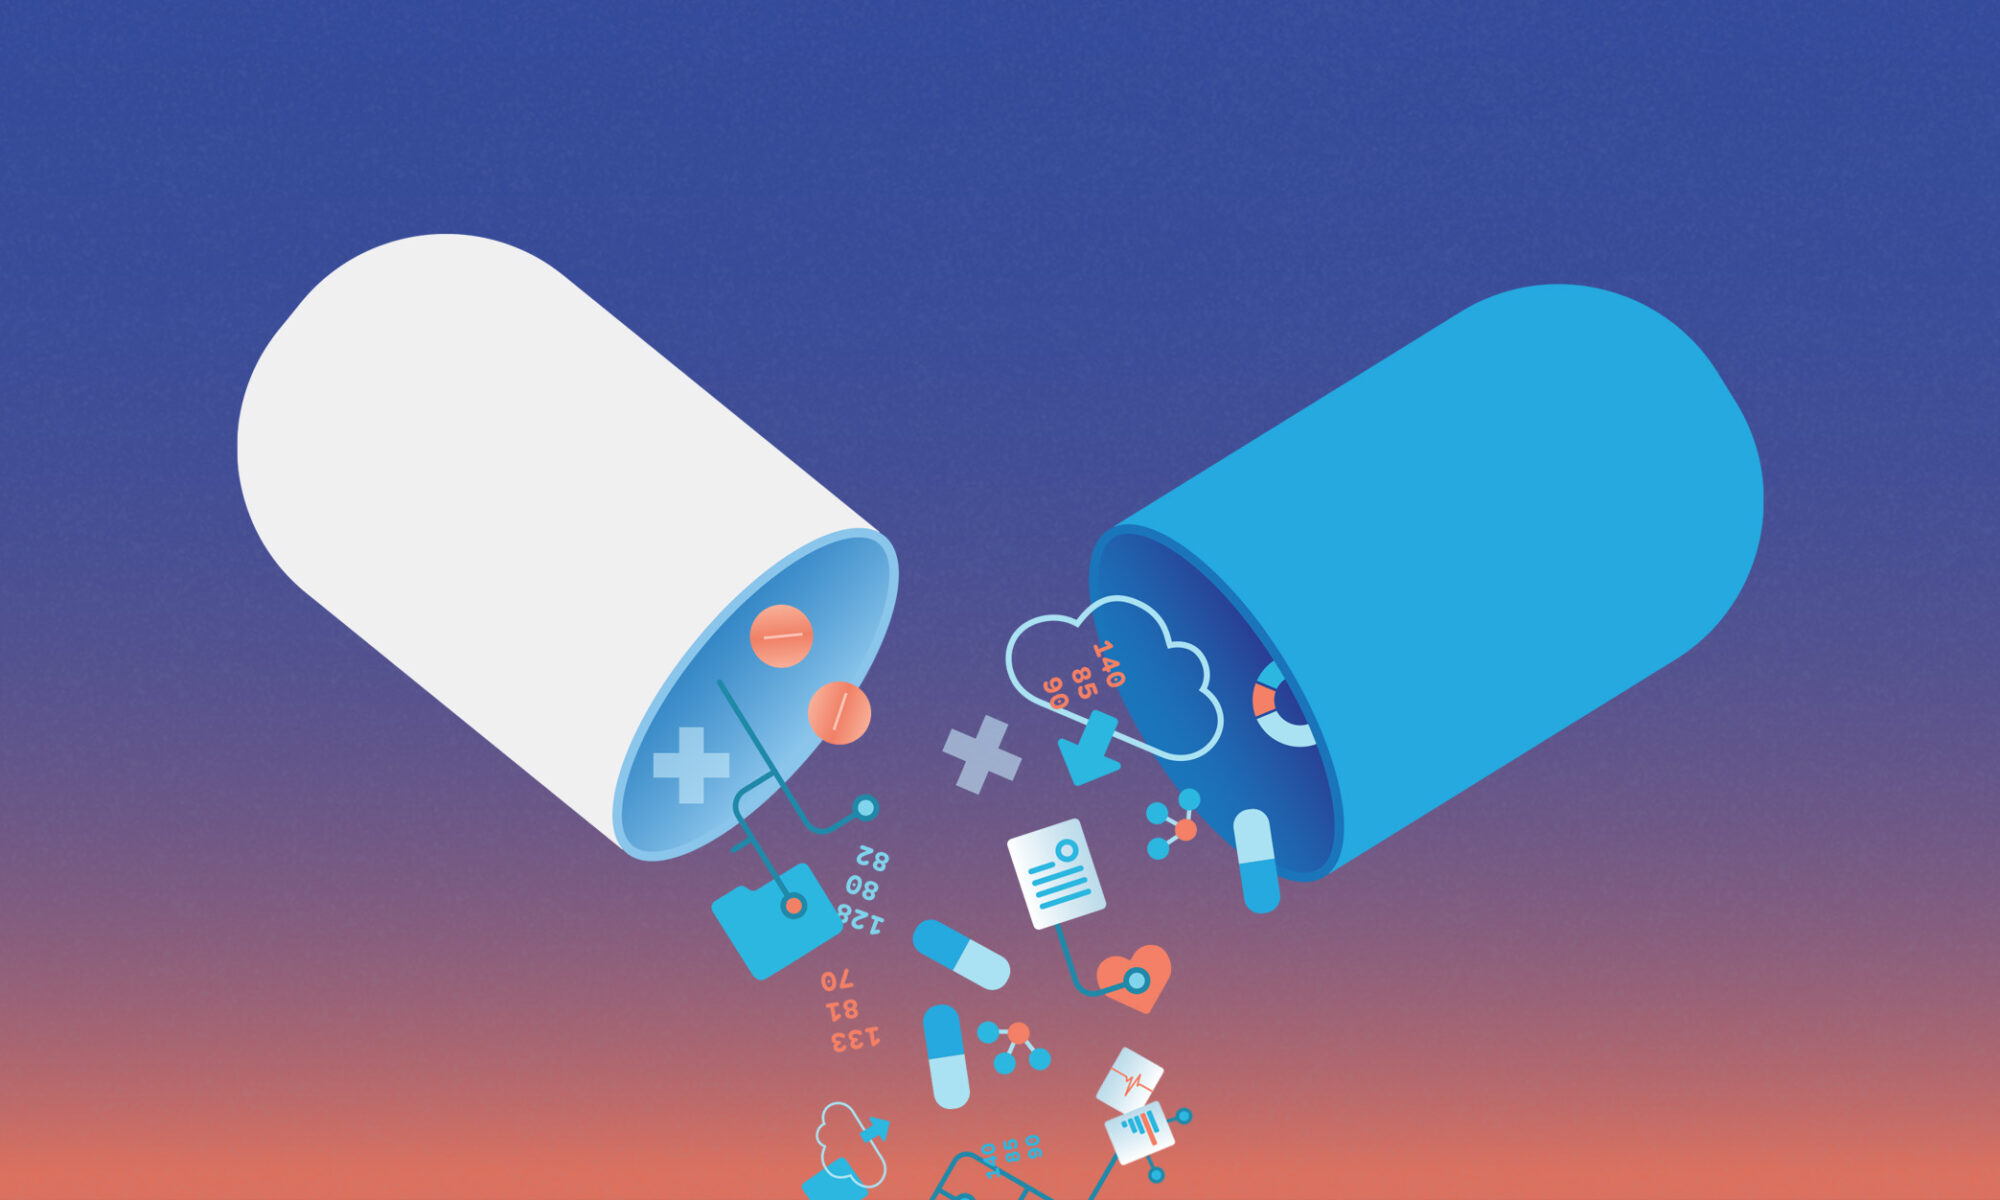 Illustration of a pill opening. Icons depicting data and information are spilling out of the open pill